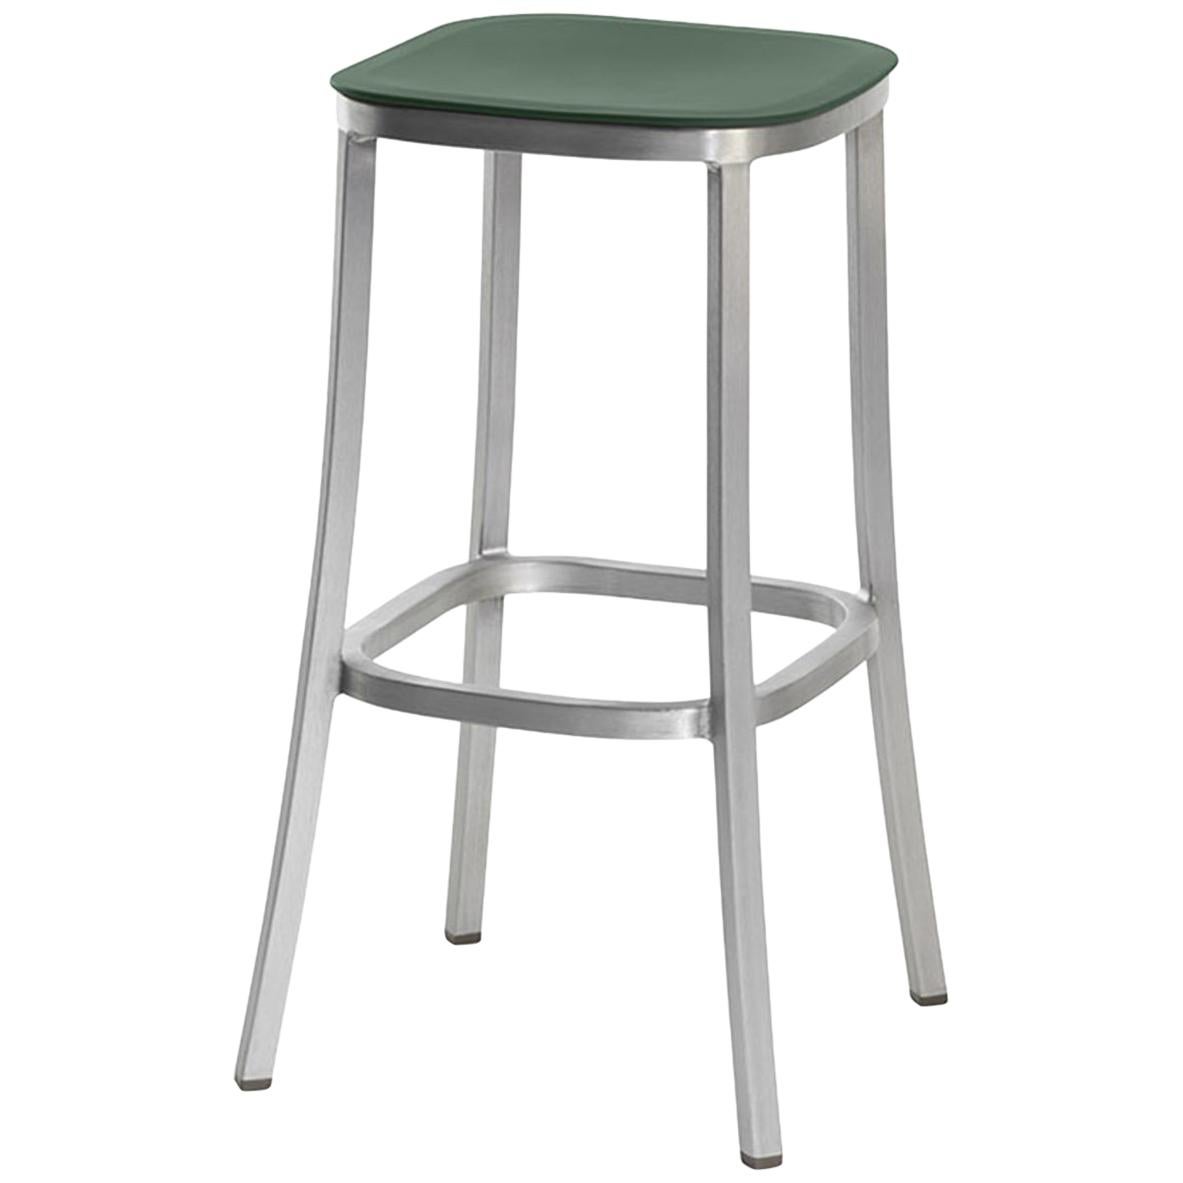 Emeco 1 Inch Barstool in Brushed Aluminum and Green by Jasper Morrison